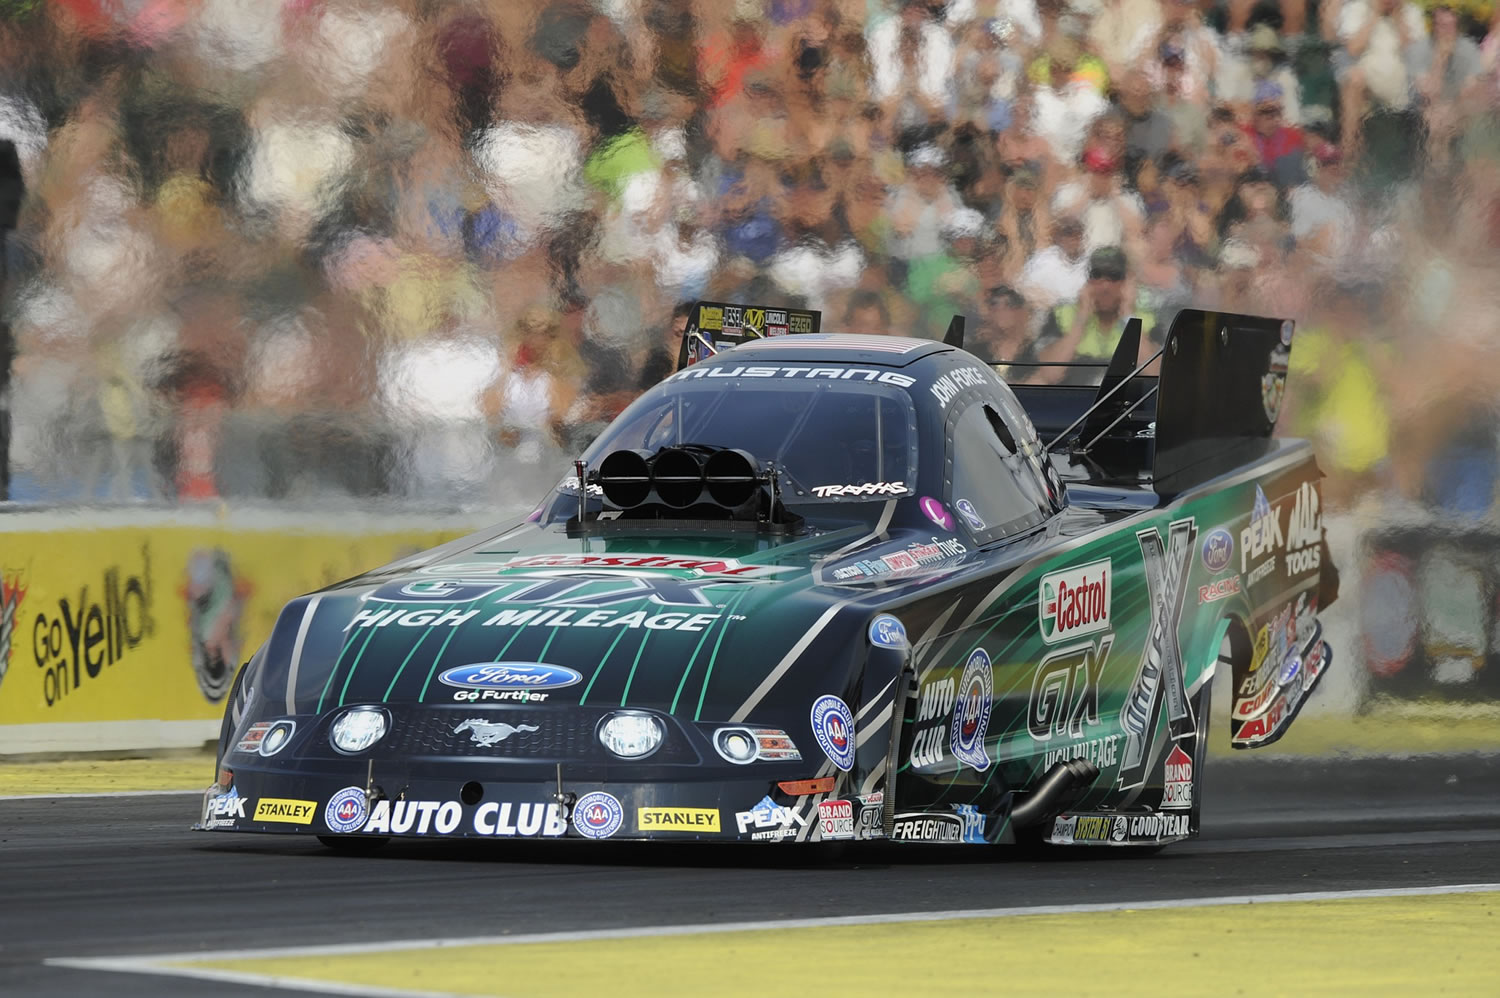 John Force drives in Funny Car qualifying Saturday, Aug. 2, 2014, at the O'Reilly Auto Parts NHRA Northwest Nationals at Pacific Raceways in Kent, Wash. Force went on to victory in Sunday's final eliminations.